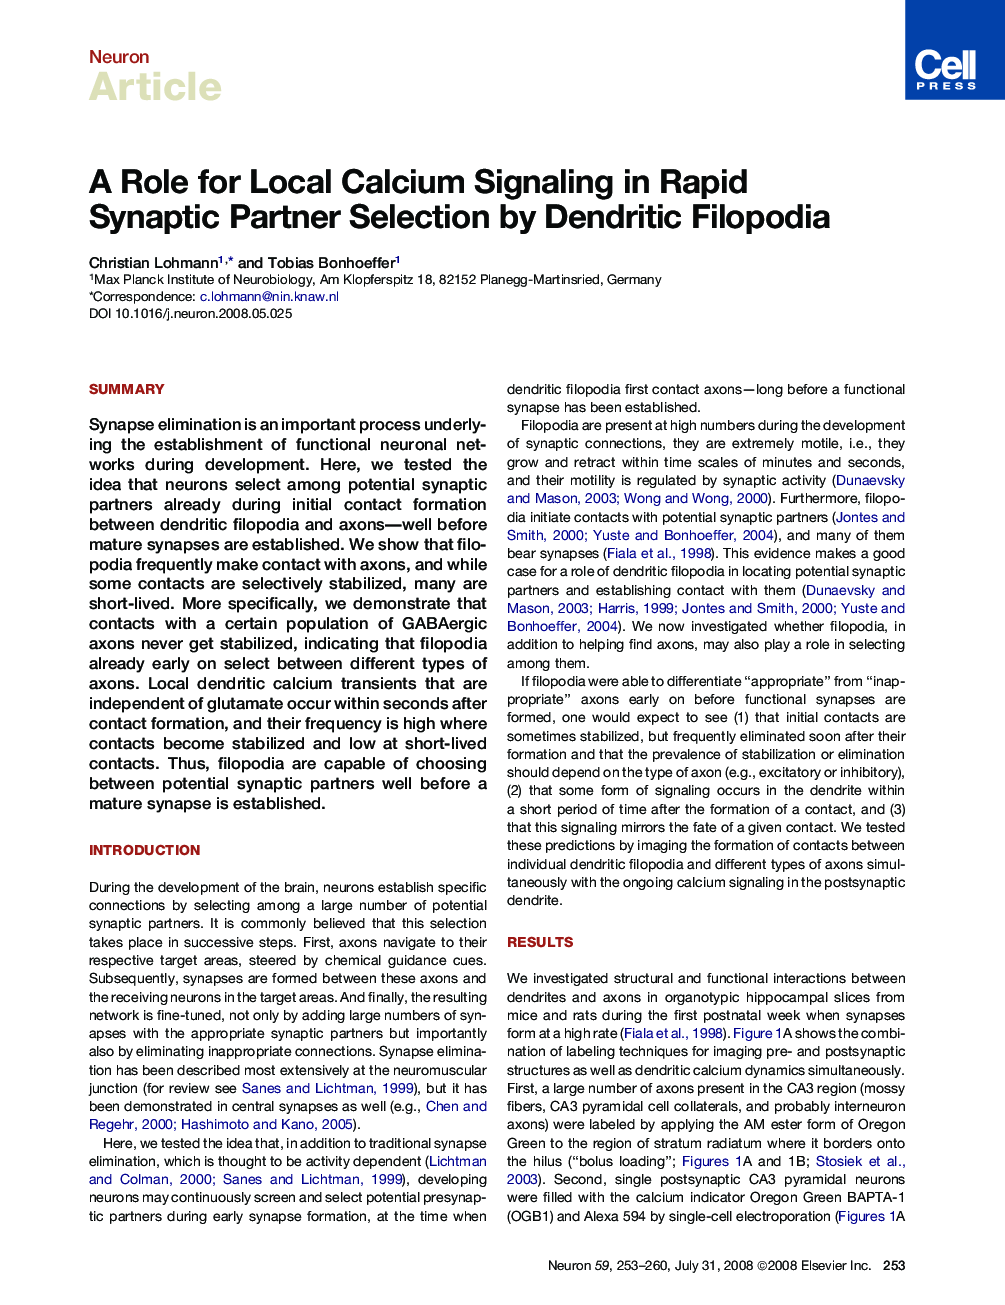 A Role for Local Calcium Signaling in Rapid Synaptic Partner Selection by Dendritic Filopodia